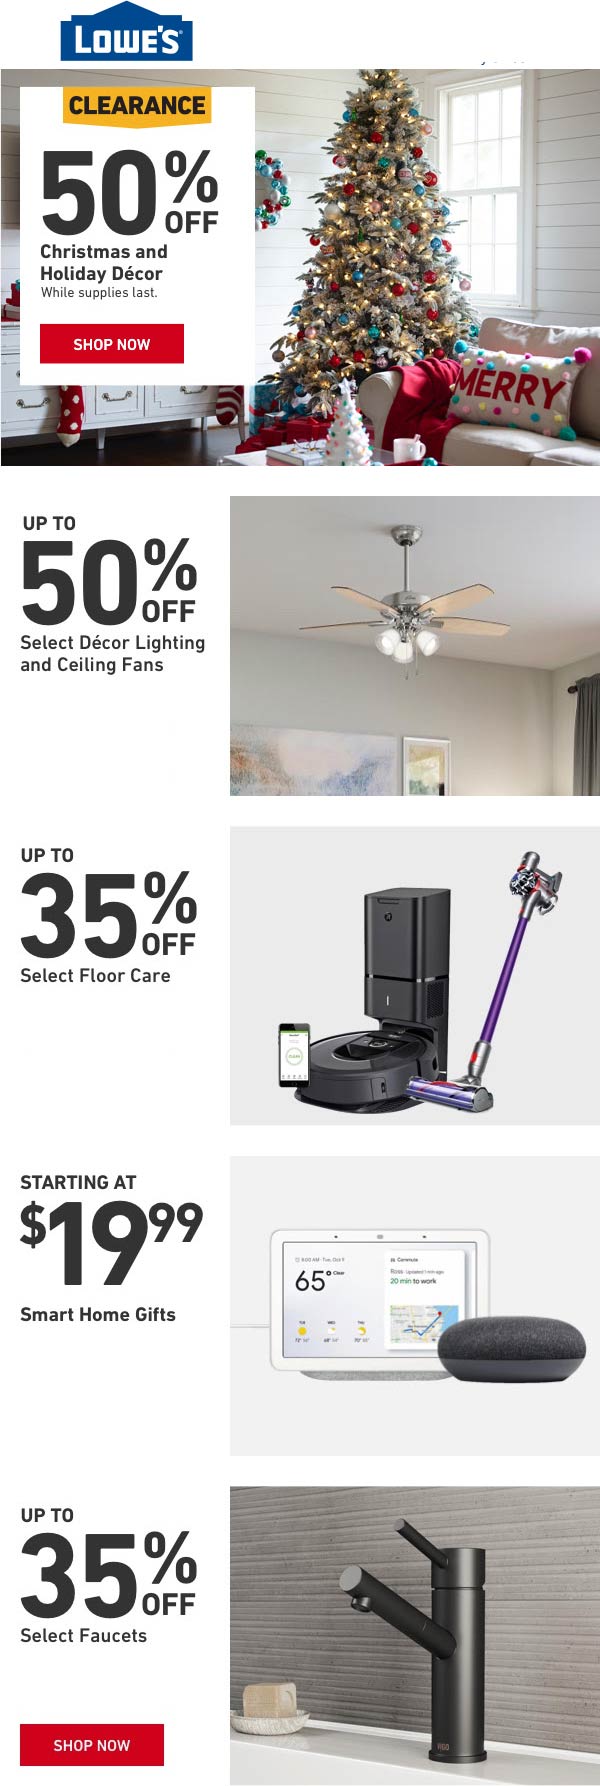 Promotional Code For Lowes June 2020